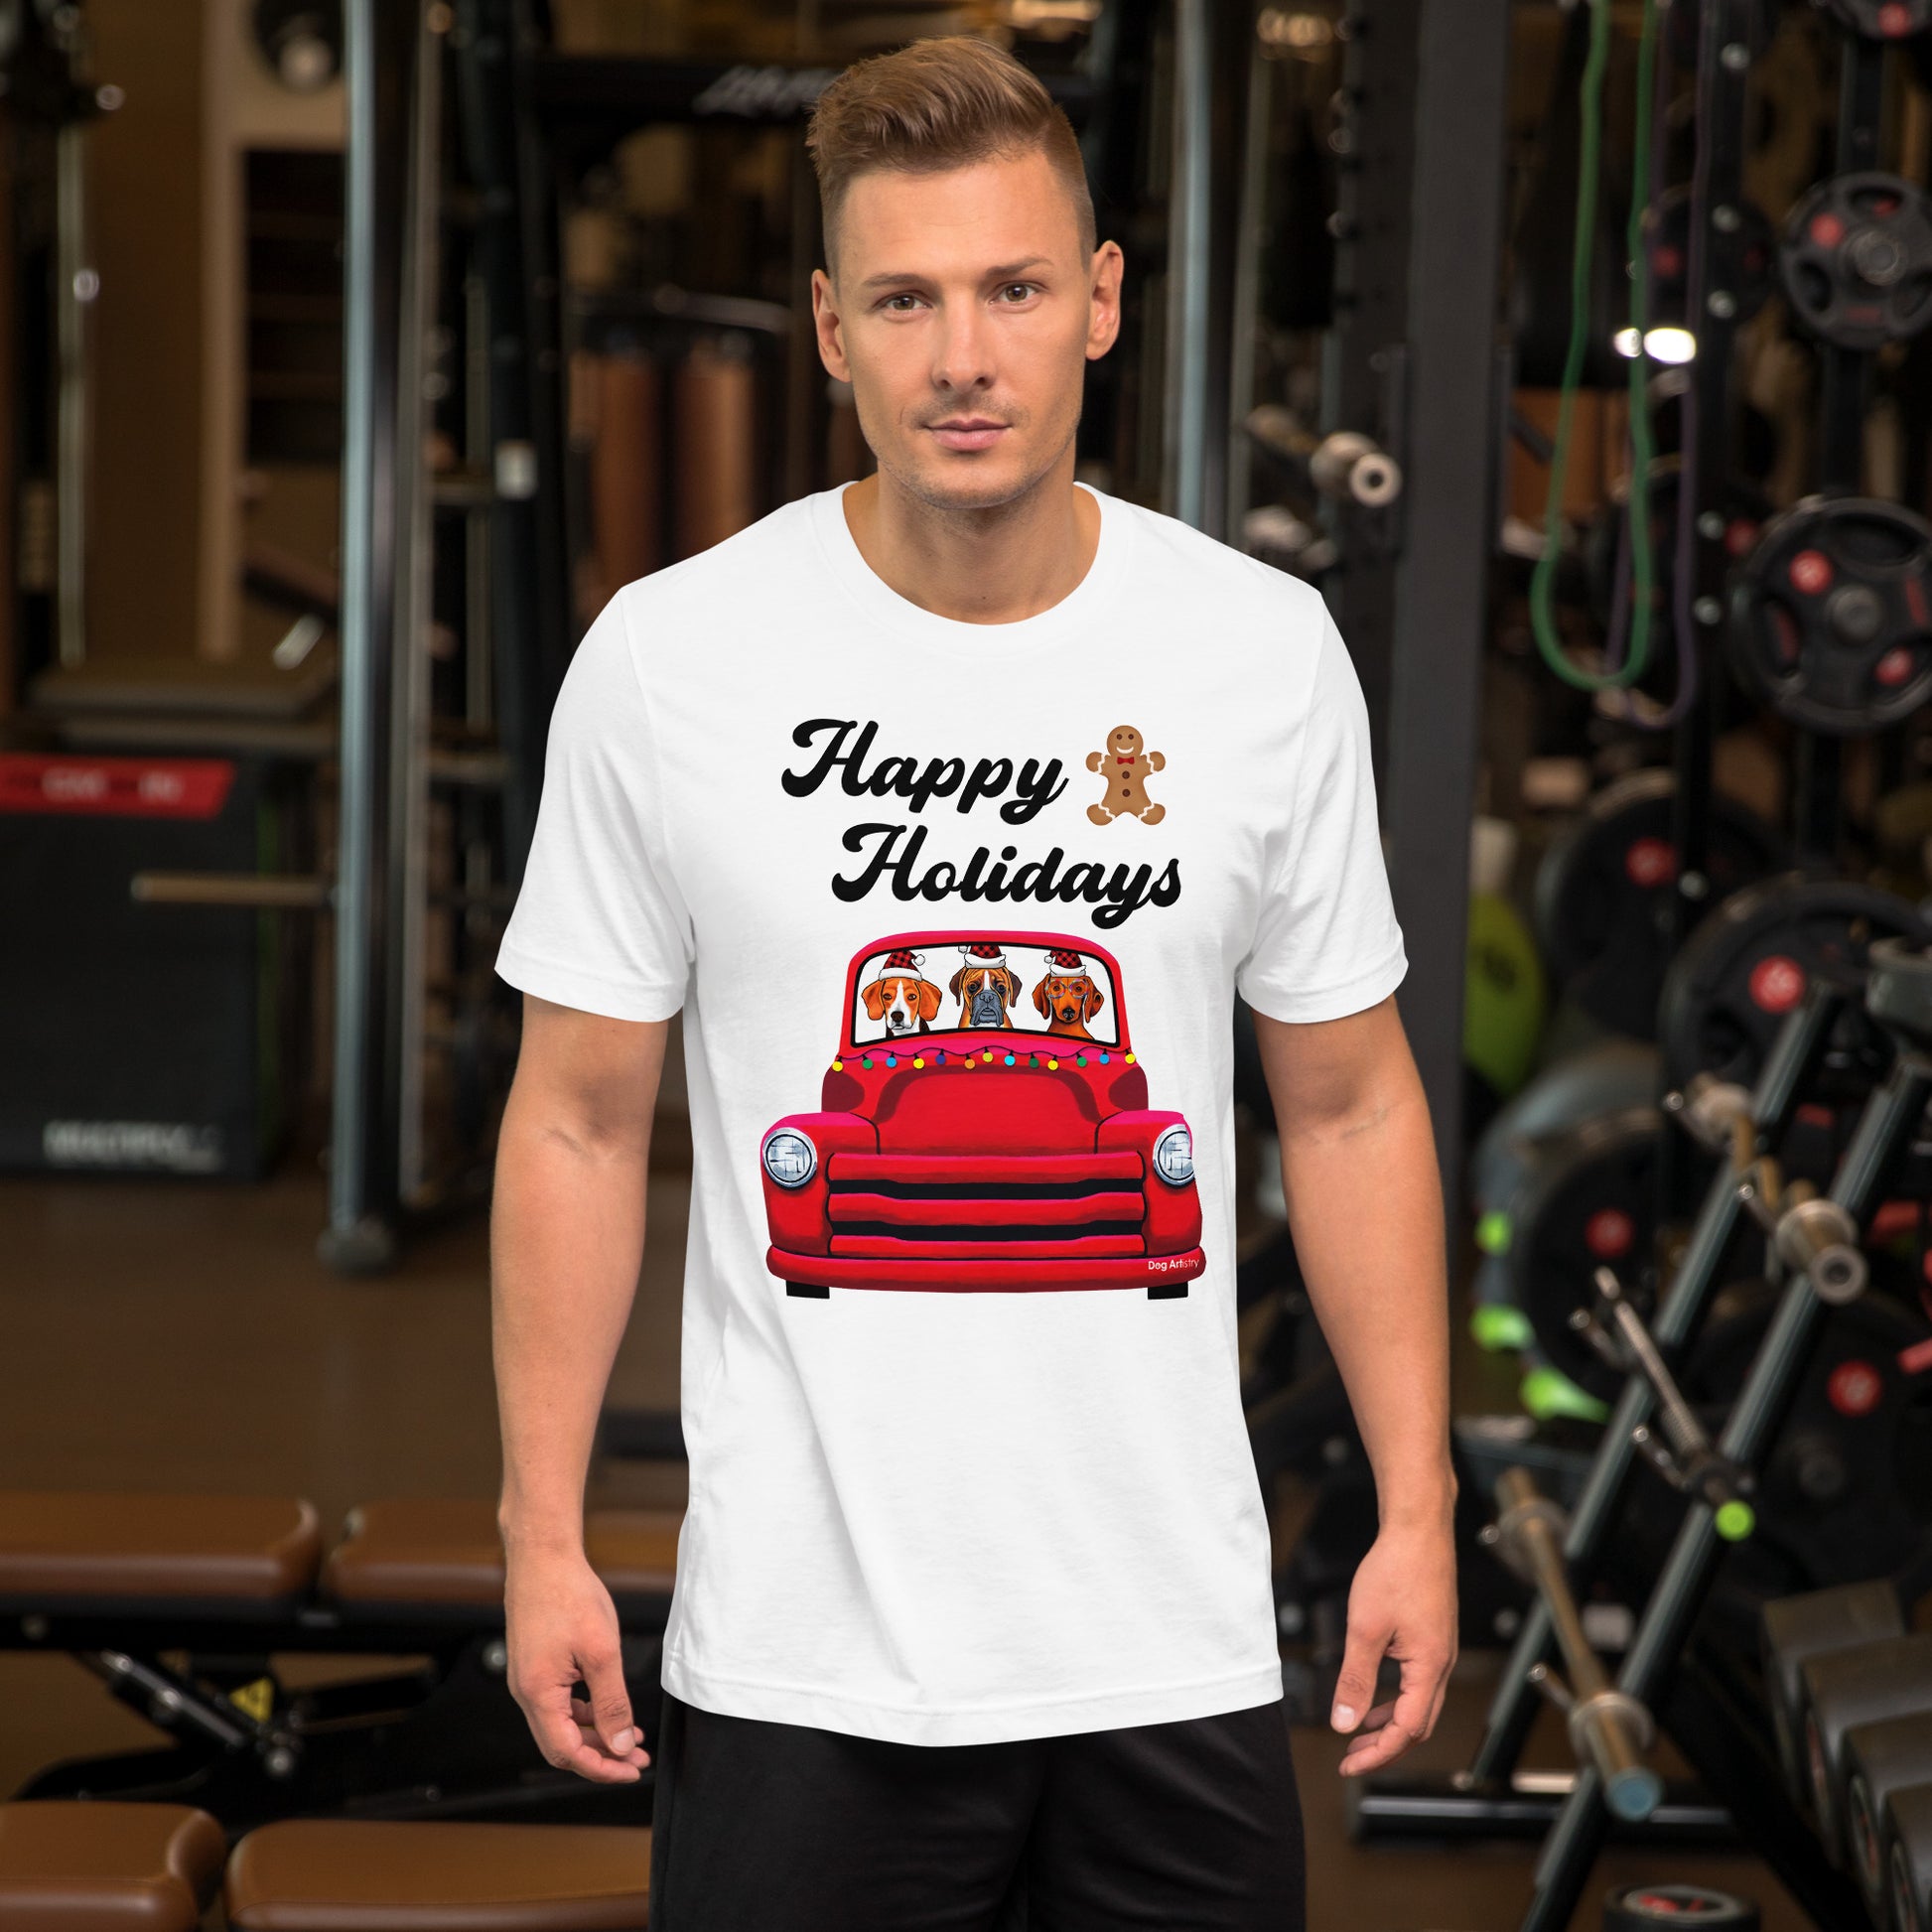 Red Holiday Truck with Beagle, Boxer, and Dachshund unisex t-shirt white by Dog Artistry